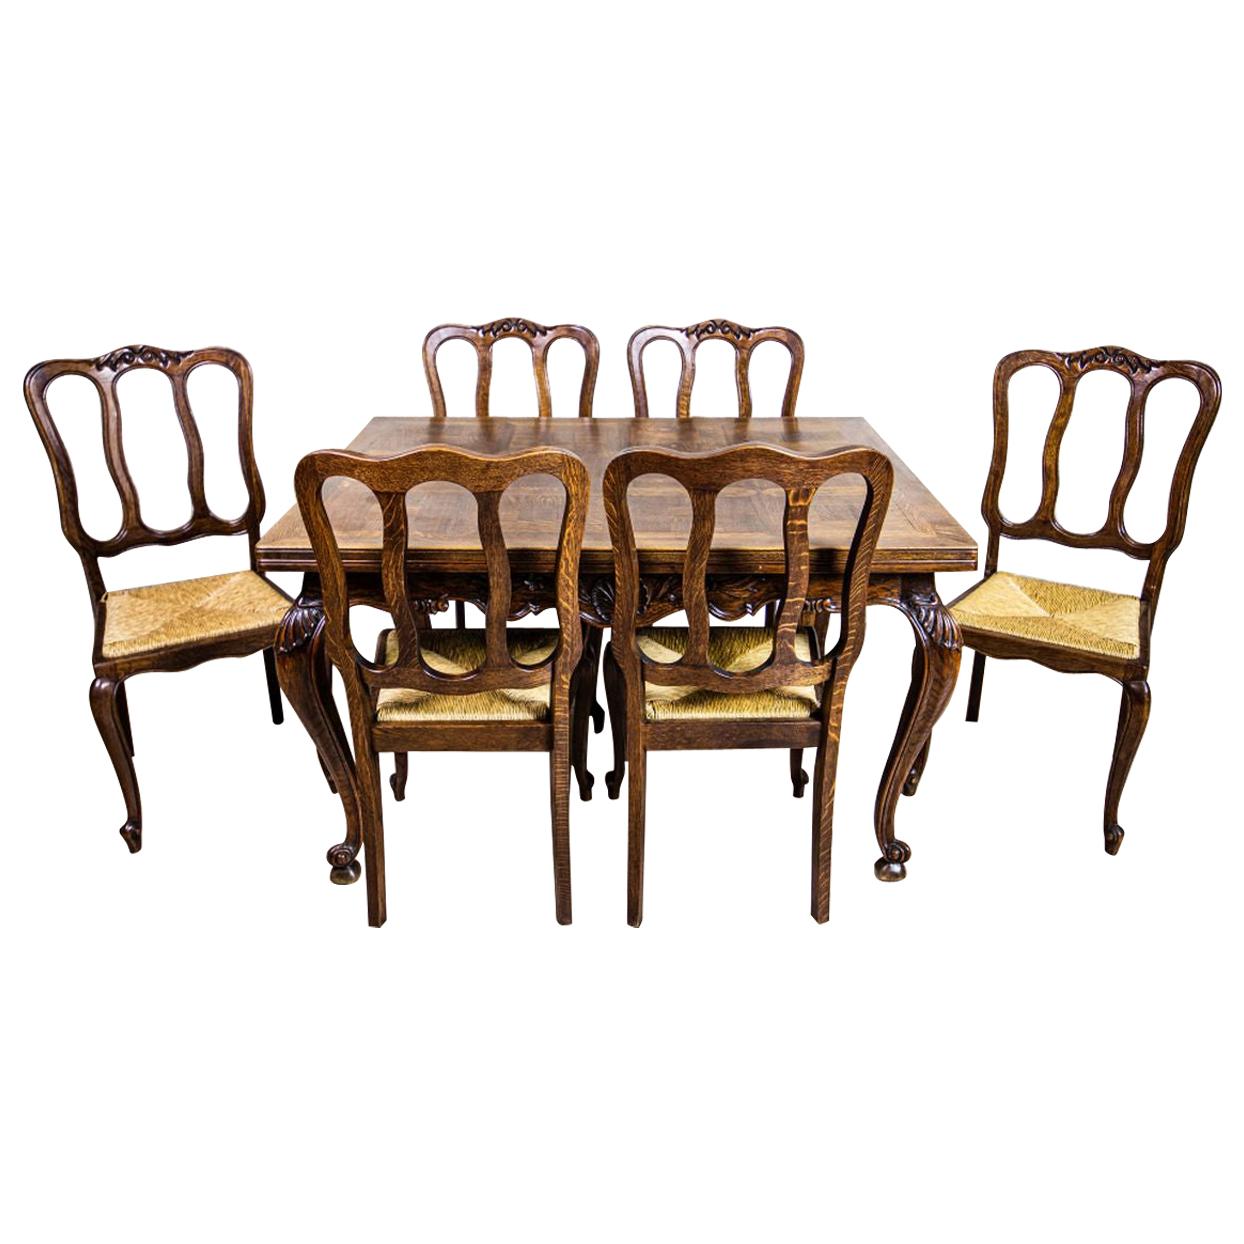 Extendable Table with Chairs, Oak Furniture Set from the Interwar Period